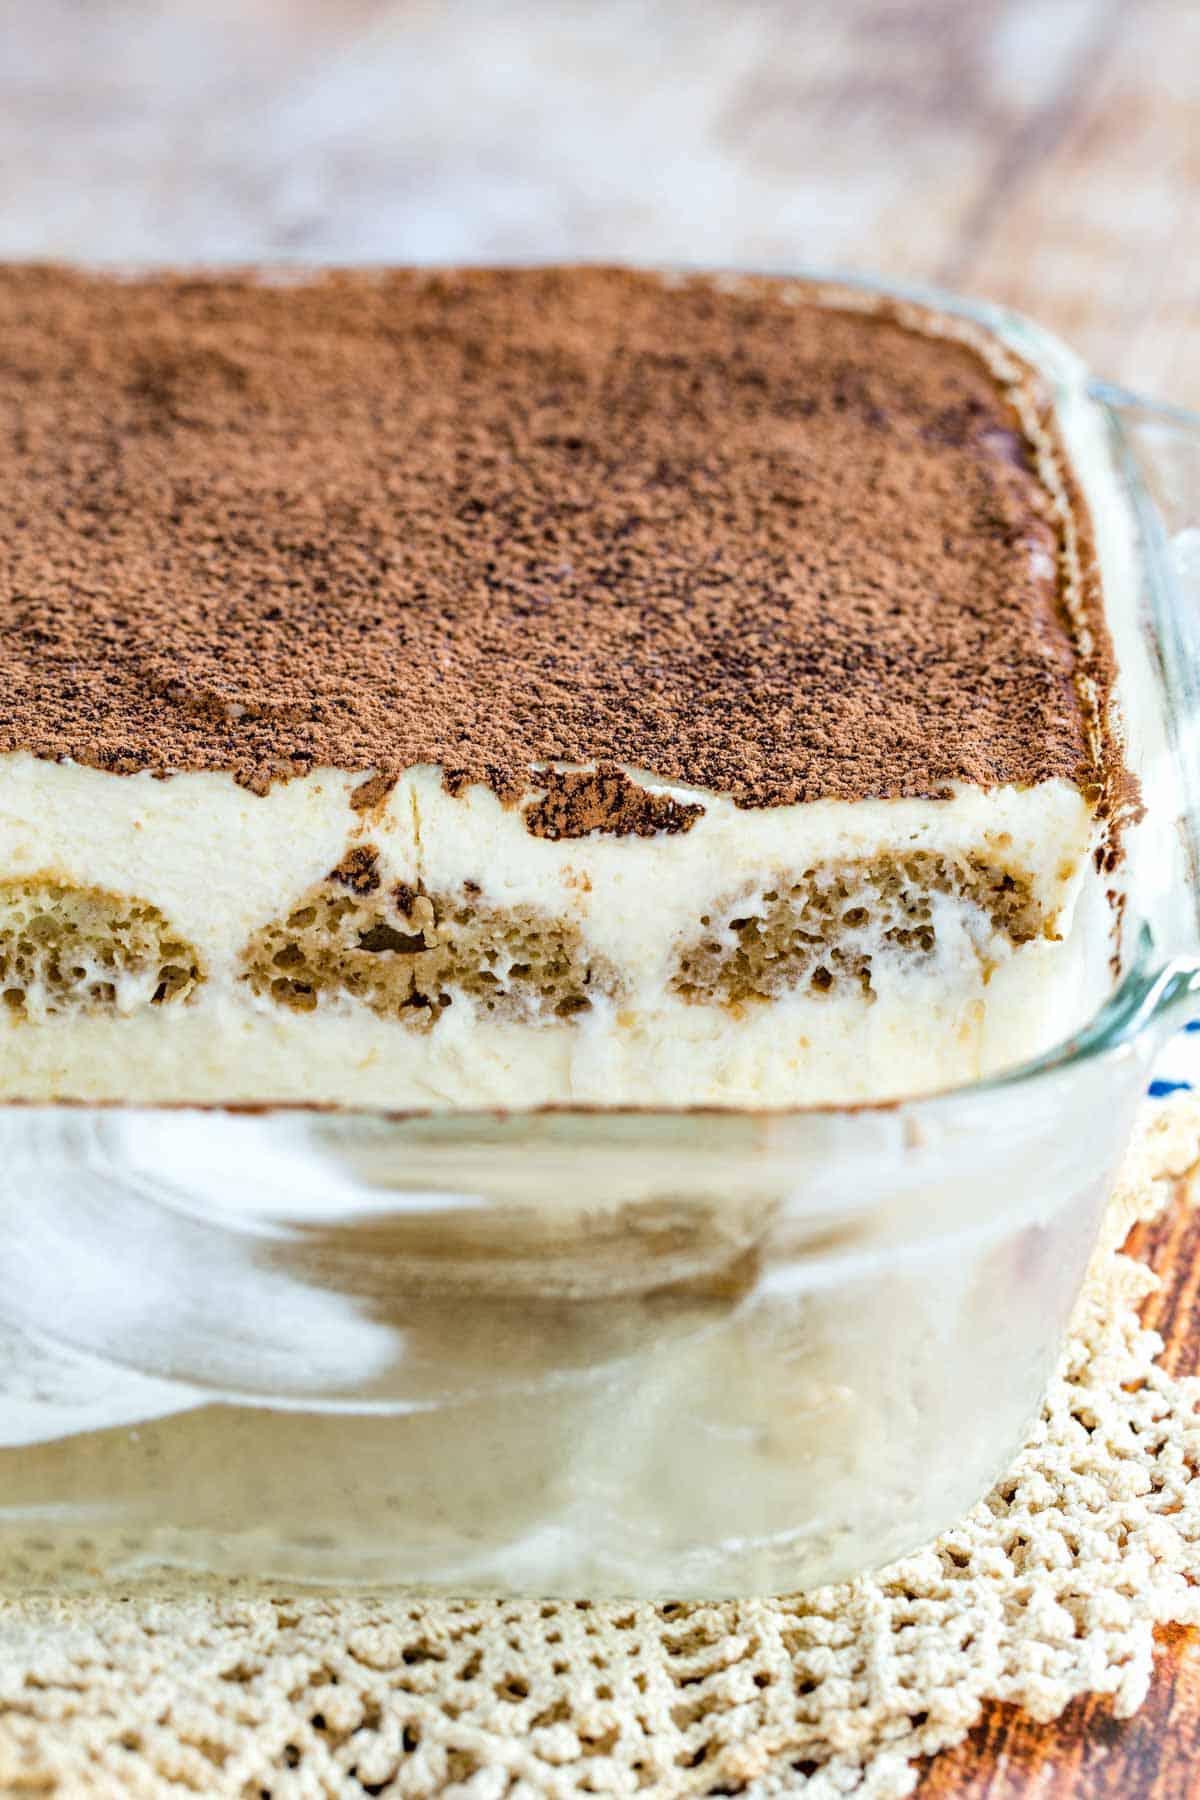 Front view of gluten-free tiramisu dusted with cocoa powder inside a glass baking dish, with two servings missing.